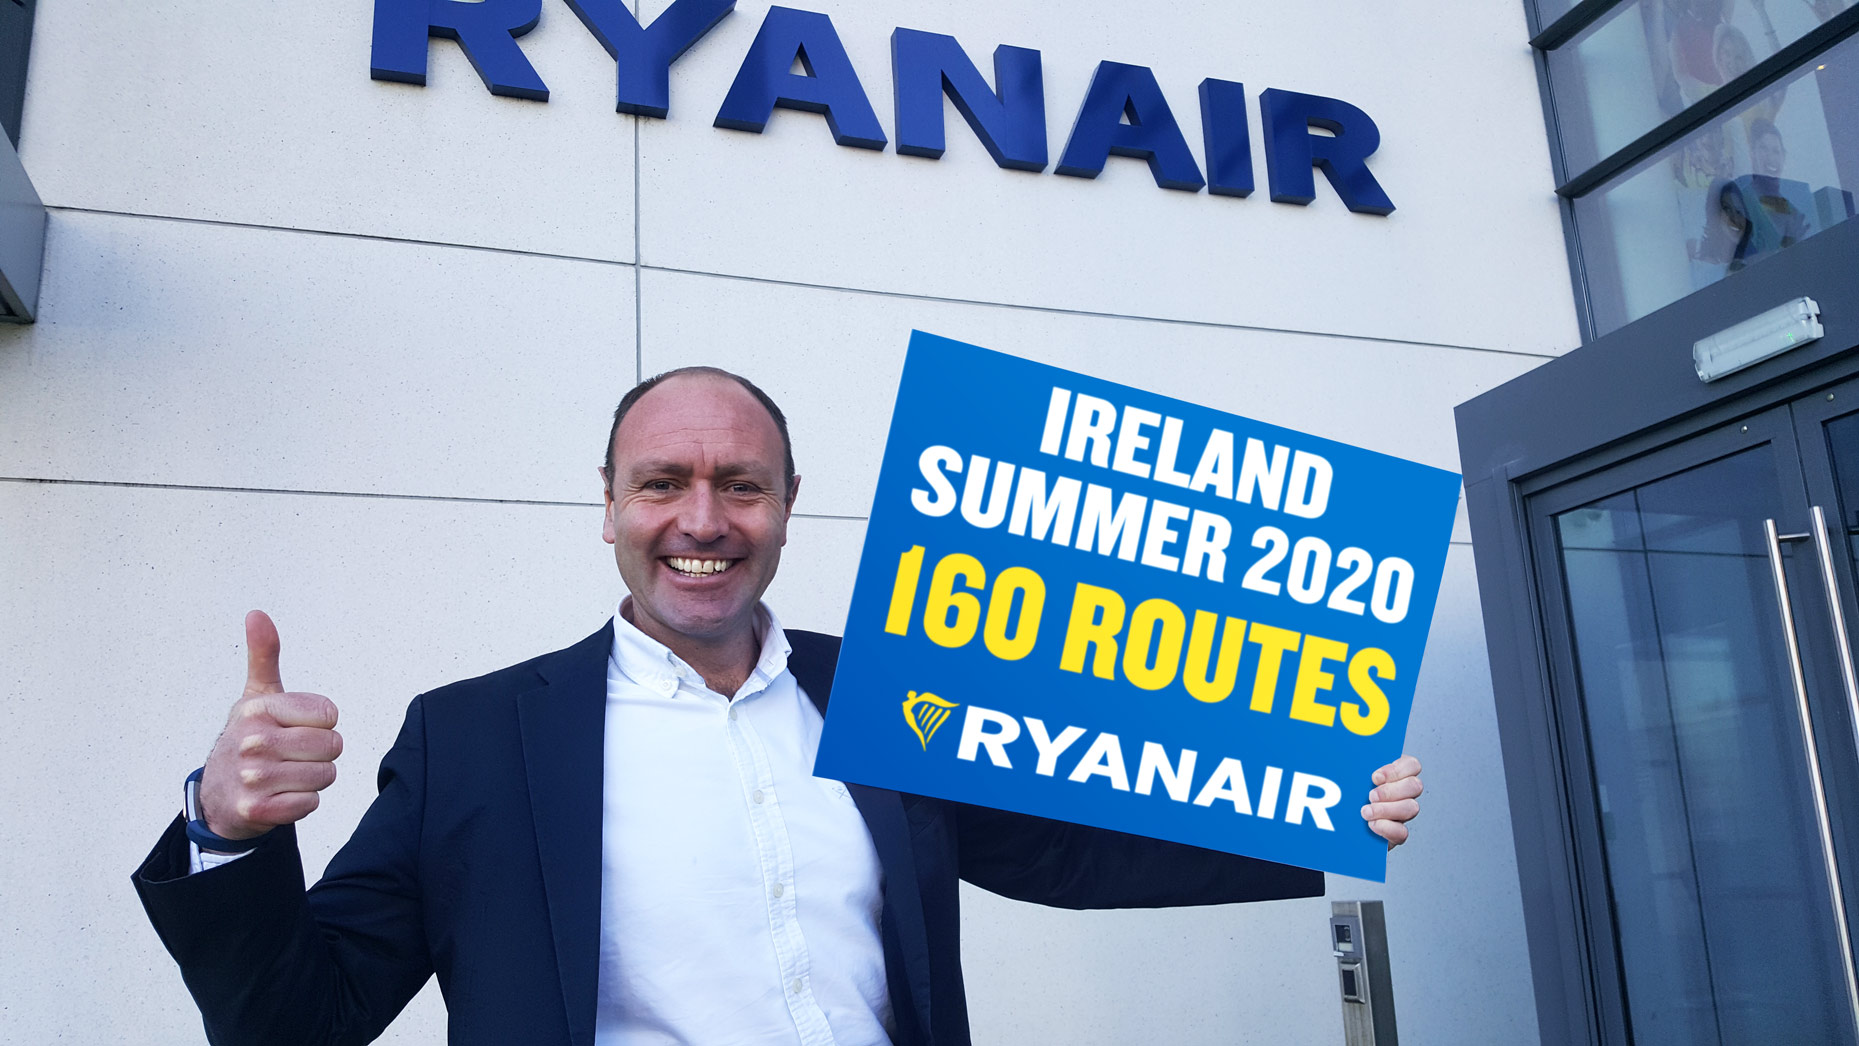 Ryanair Launches Irish Summer 20 Schedule – 160 Routes On Sale Now